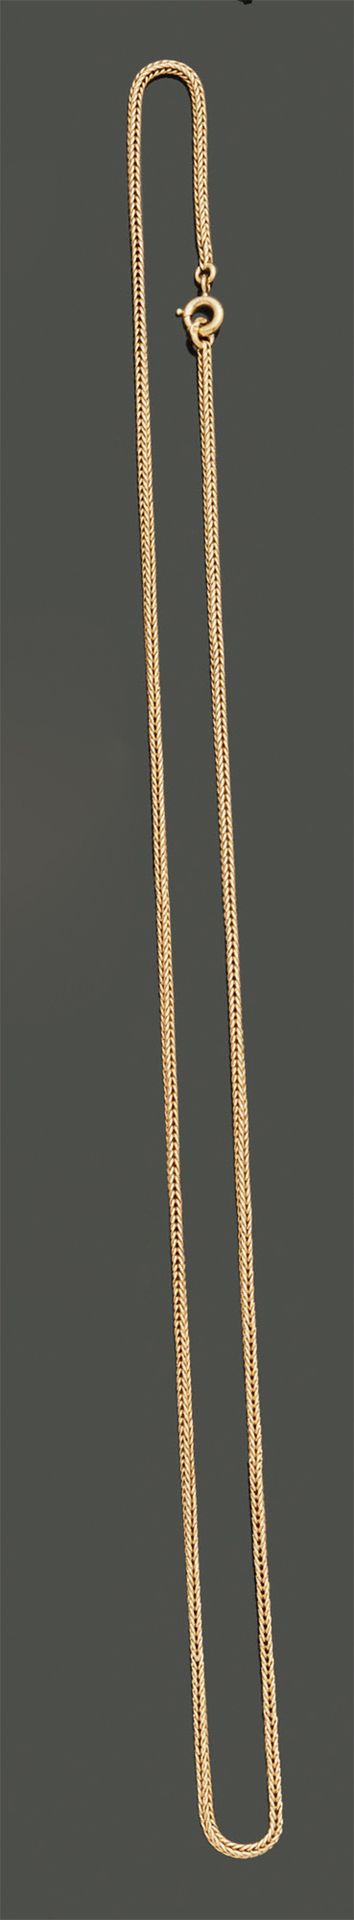 Null Chain in 18K (750) yellow gold. Weight : 10,26 g.